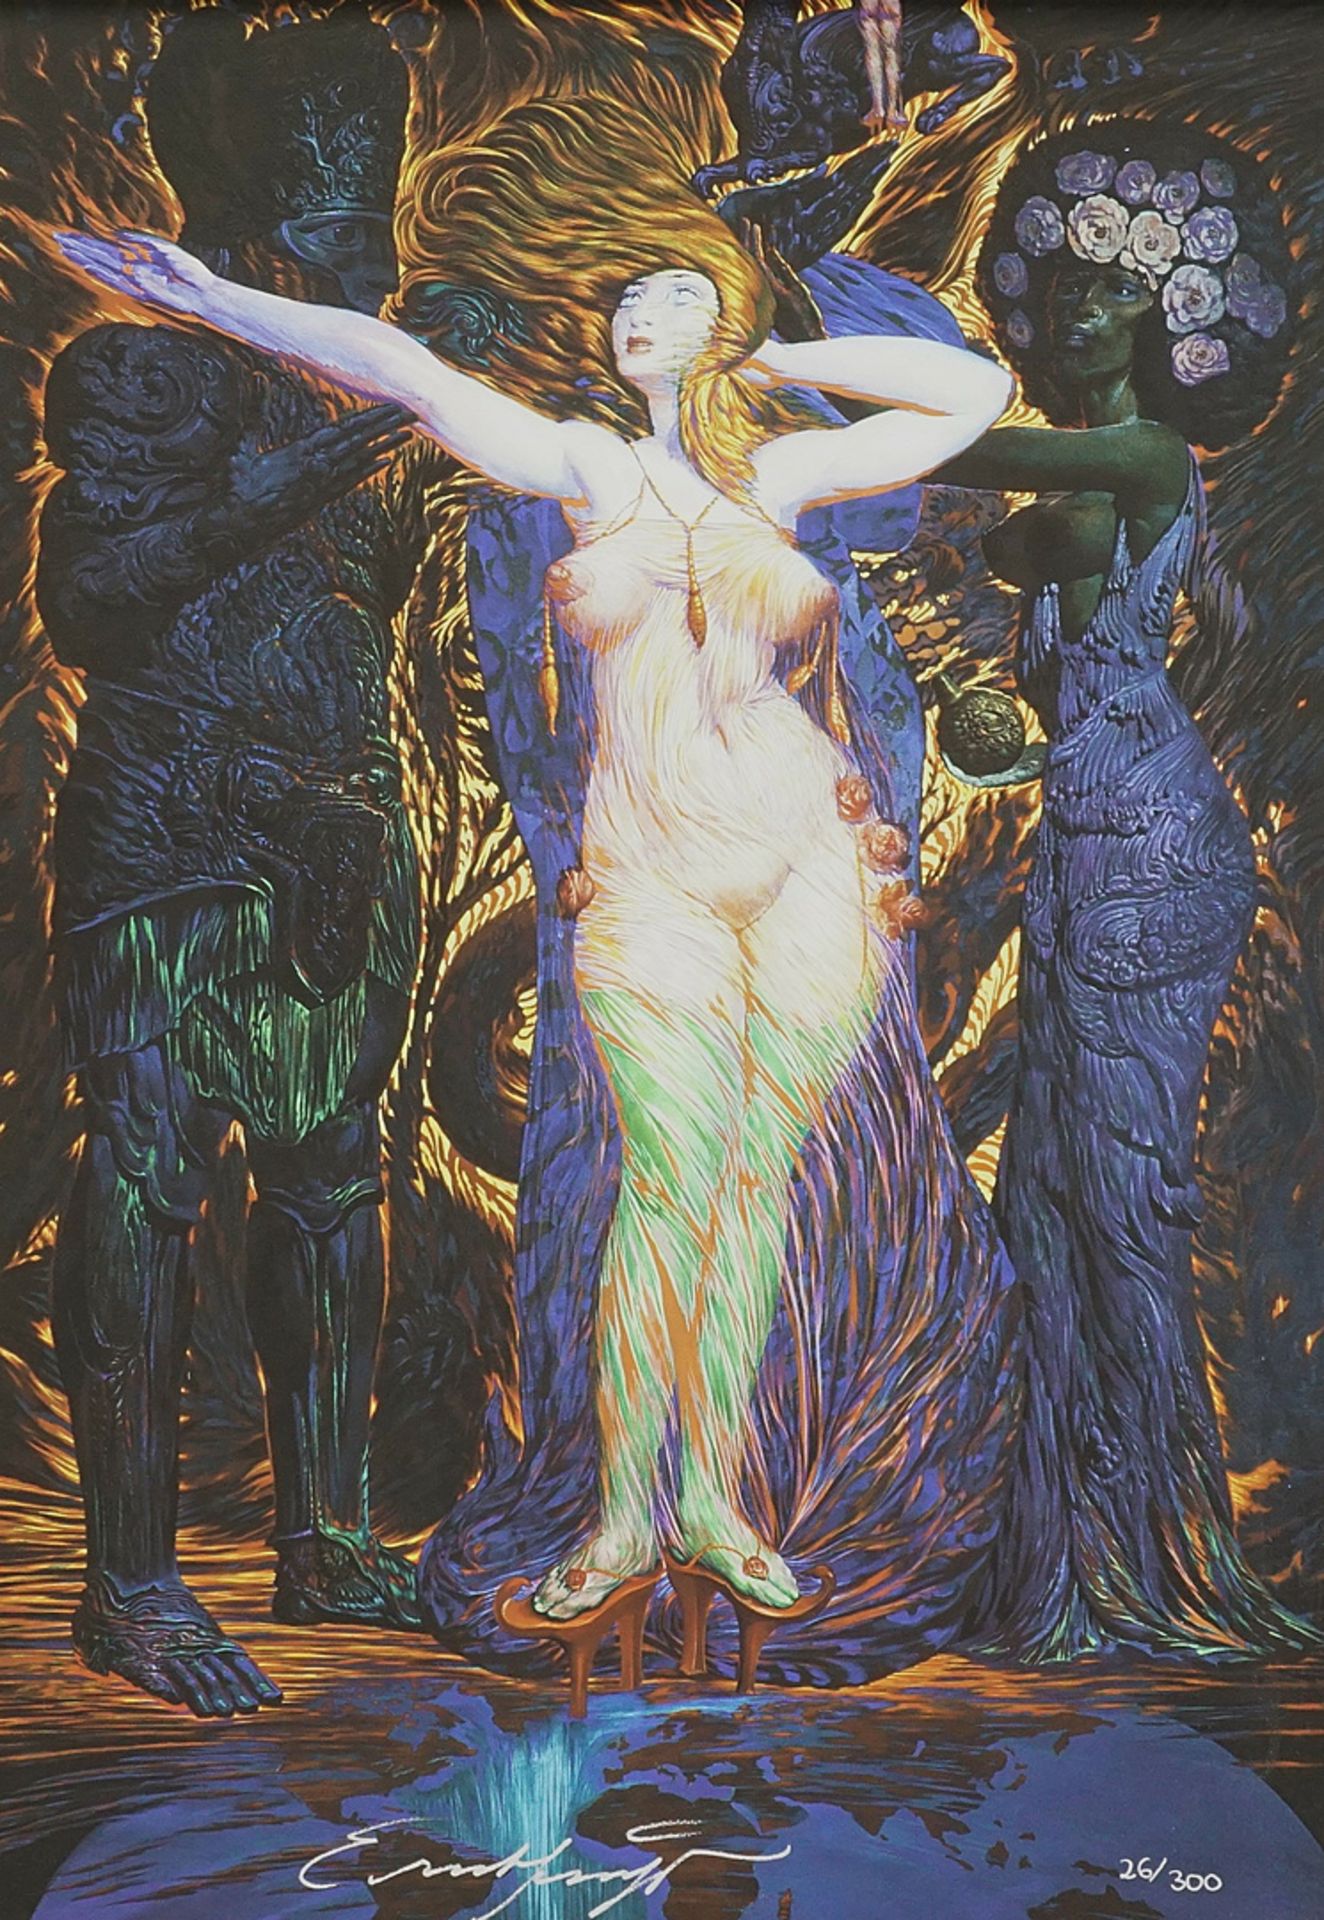 Ernst Fuchs (1930-2015), The clothing of Esther